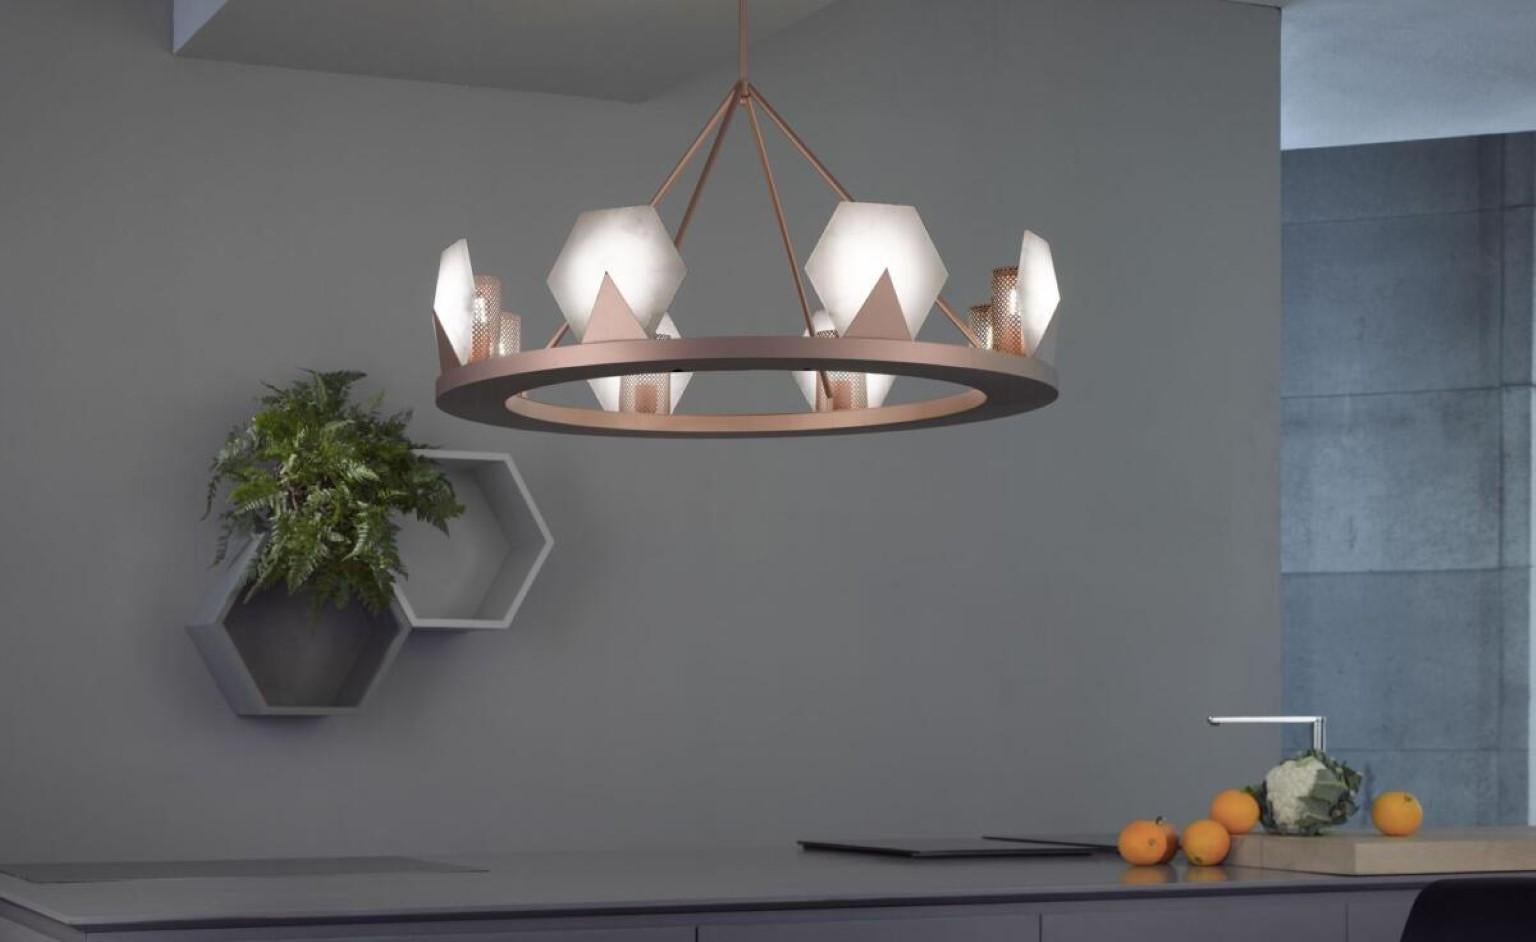 Chandelier Artemide by Alabastro Italiano
Dimensions: D 115 x H 94 cm
Materials: Italian white alabaster, Italian iron, copper 
Other finishes available. 
Light Source 8 x E27 LED 11 Watt, Tot. 8400 Lumen, 3000 k, 220 V

All our lamps can be